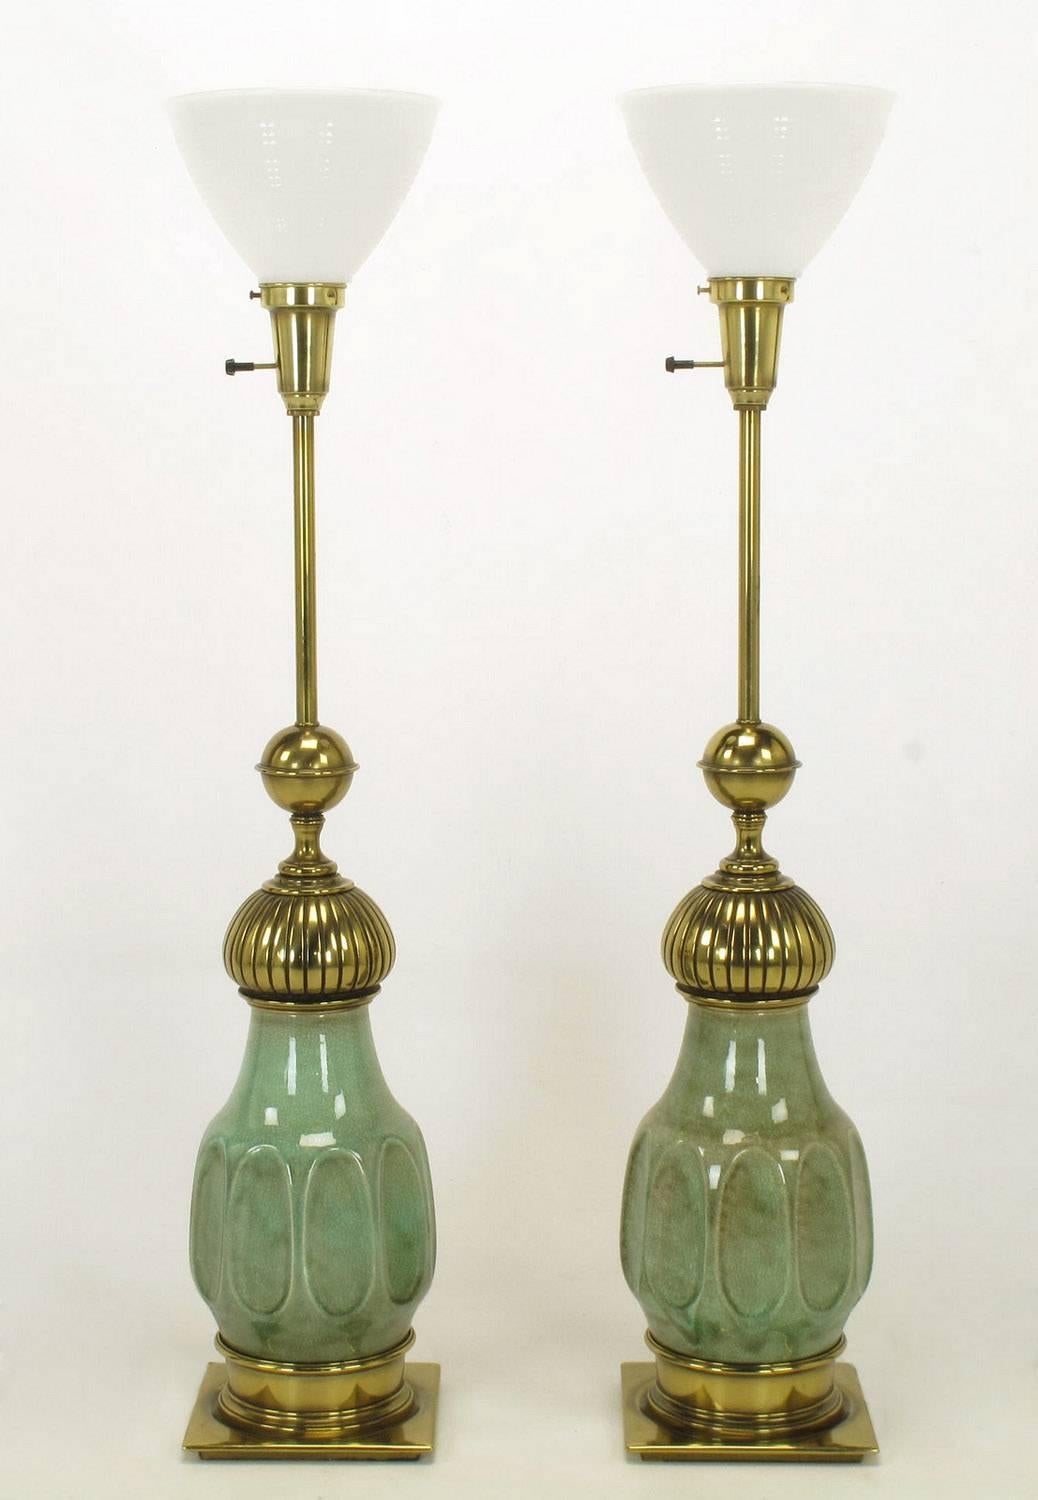 Excellent pair of brass and ceramic bodied Moorish style table lamps by Stiffel. Ceramic bodies are a mottled sea foam green crackle glazed urn form. Brass flat plinth, incised cap and ball, stem and milk glass diffuser. Sold sans shades.